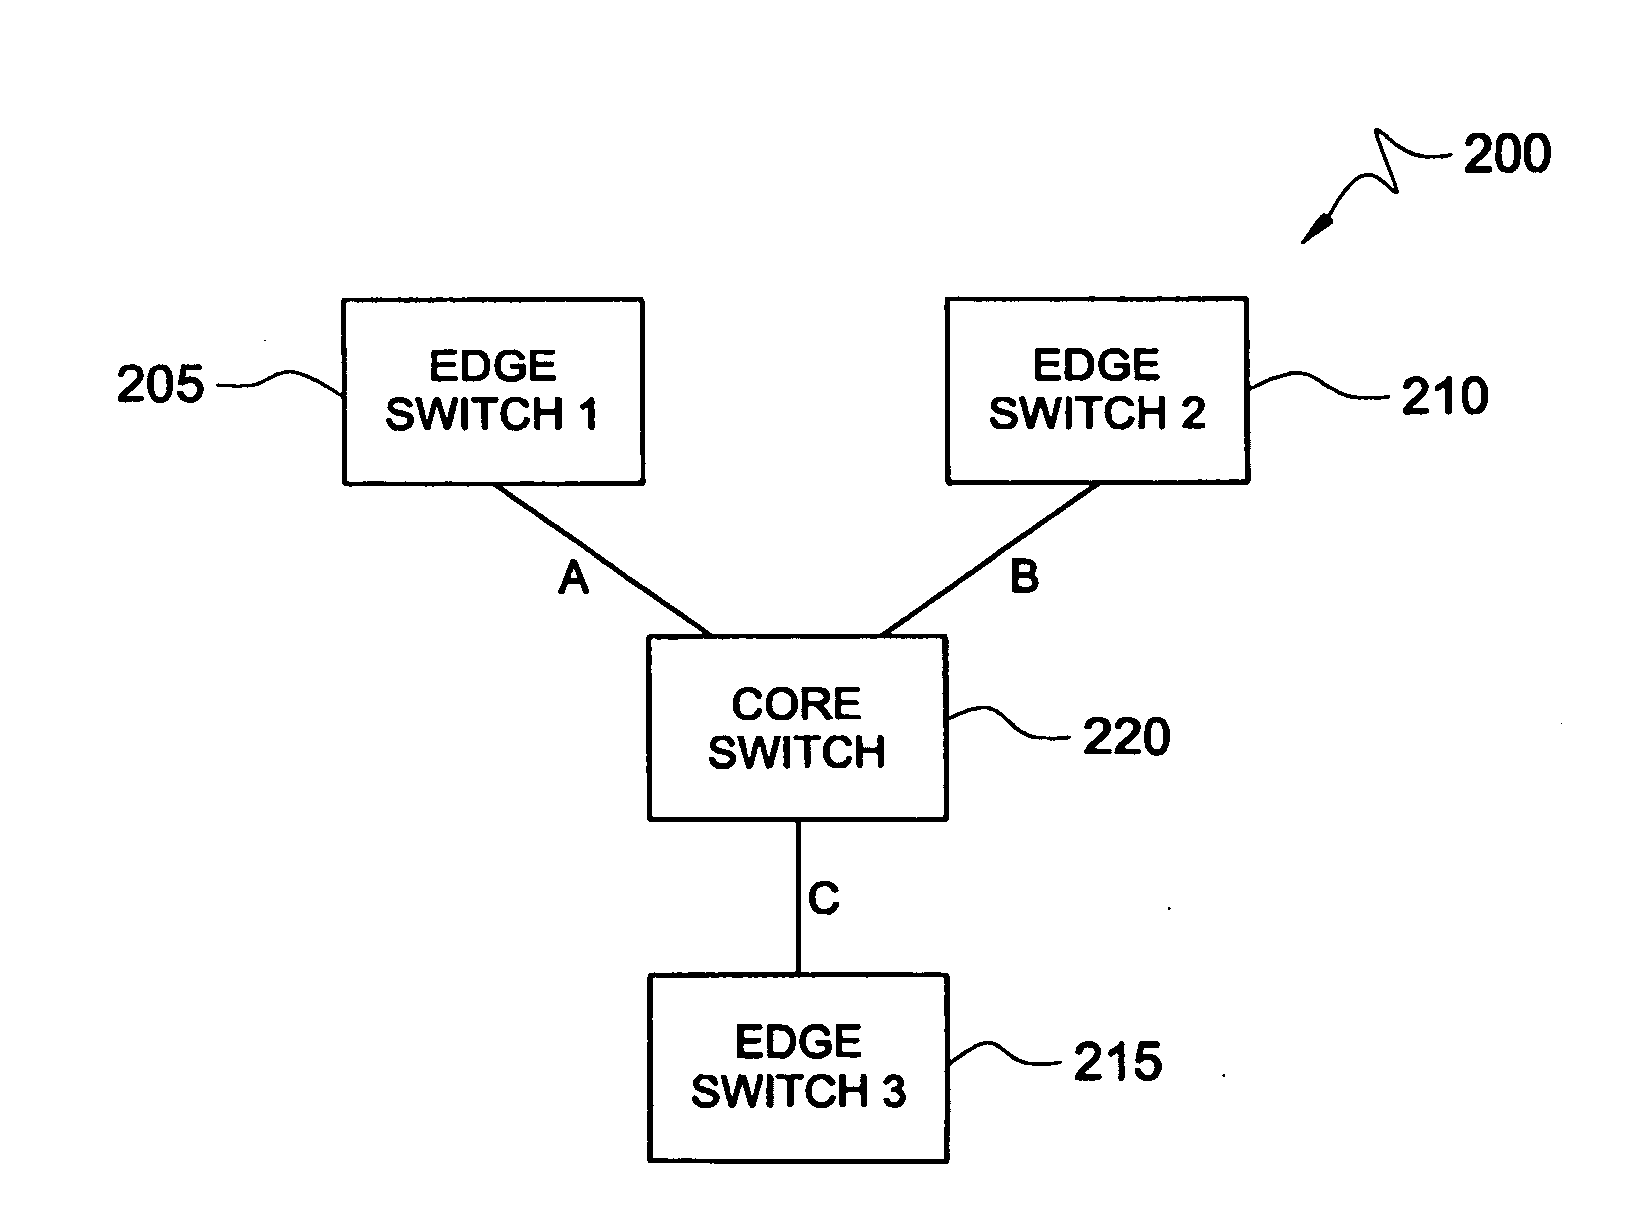 System and method for connectivity between hosts and devices